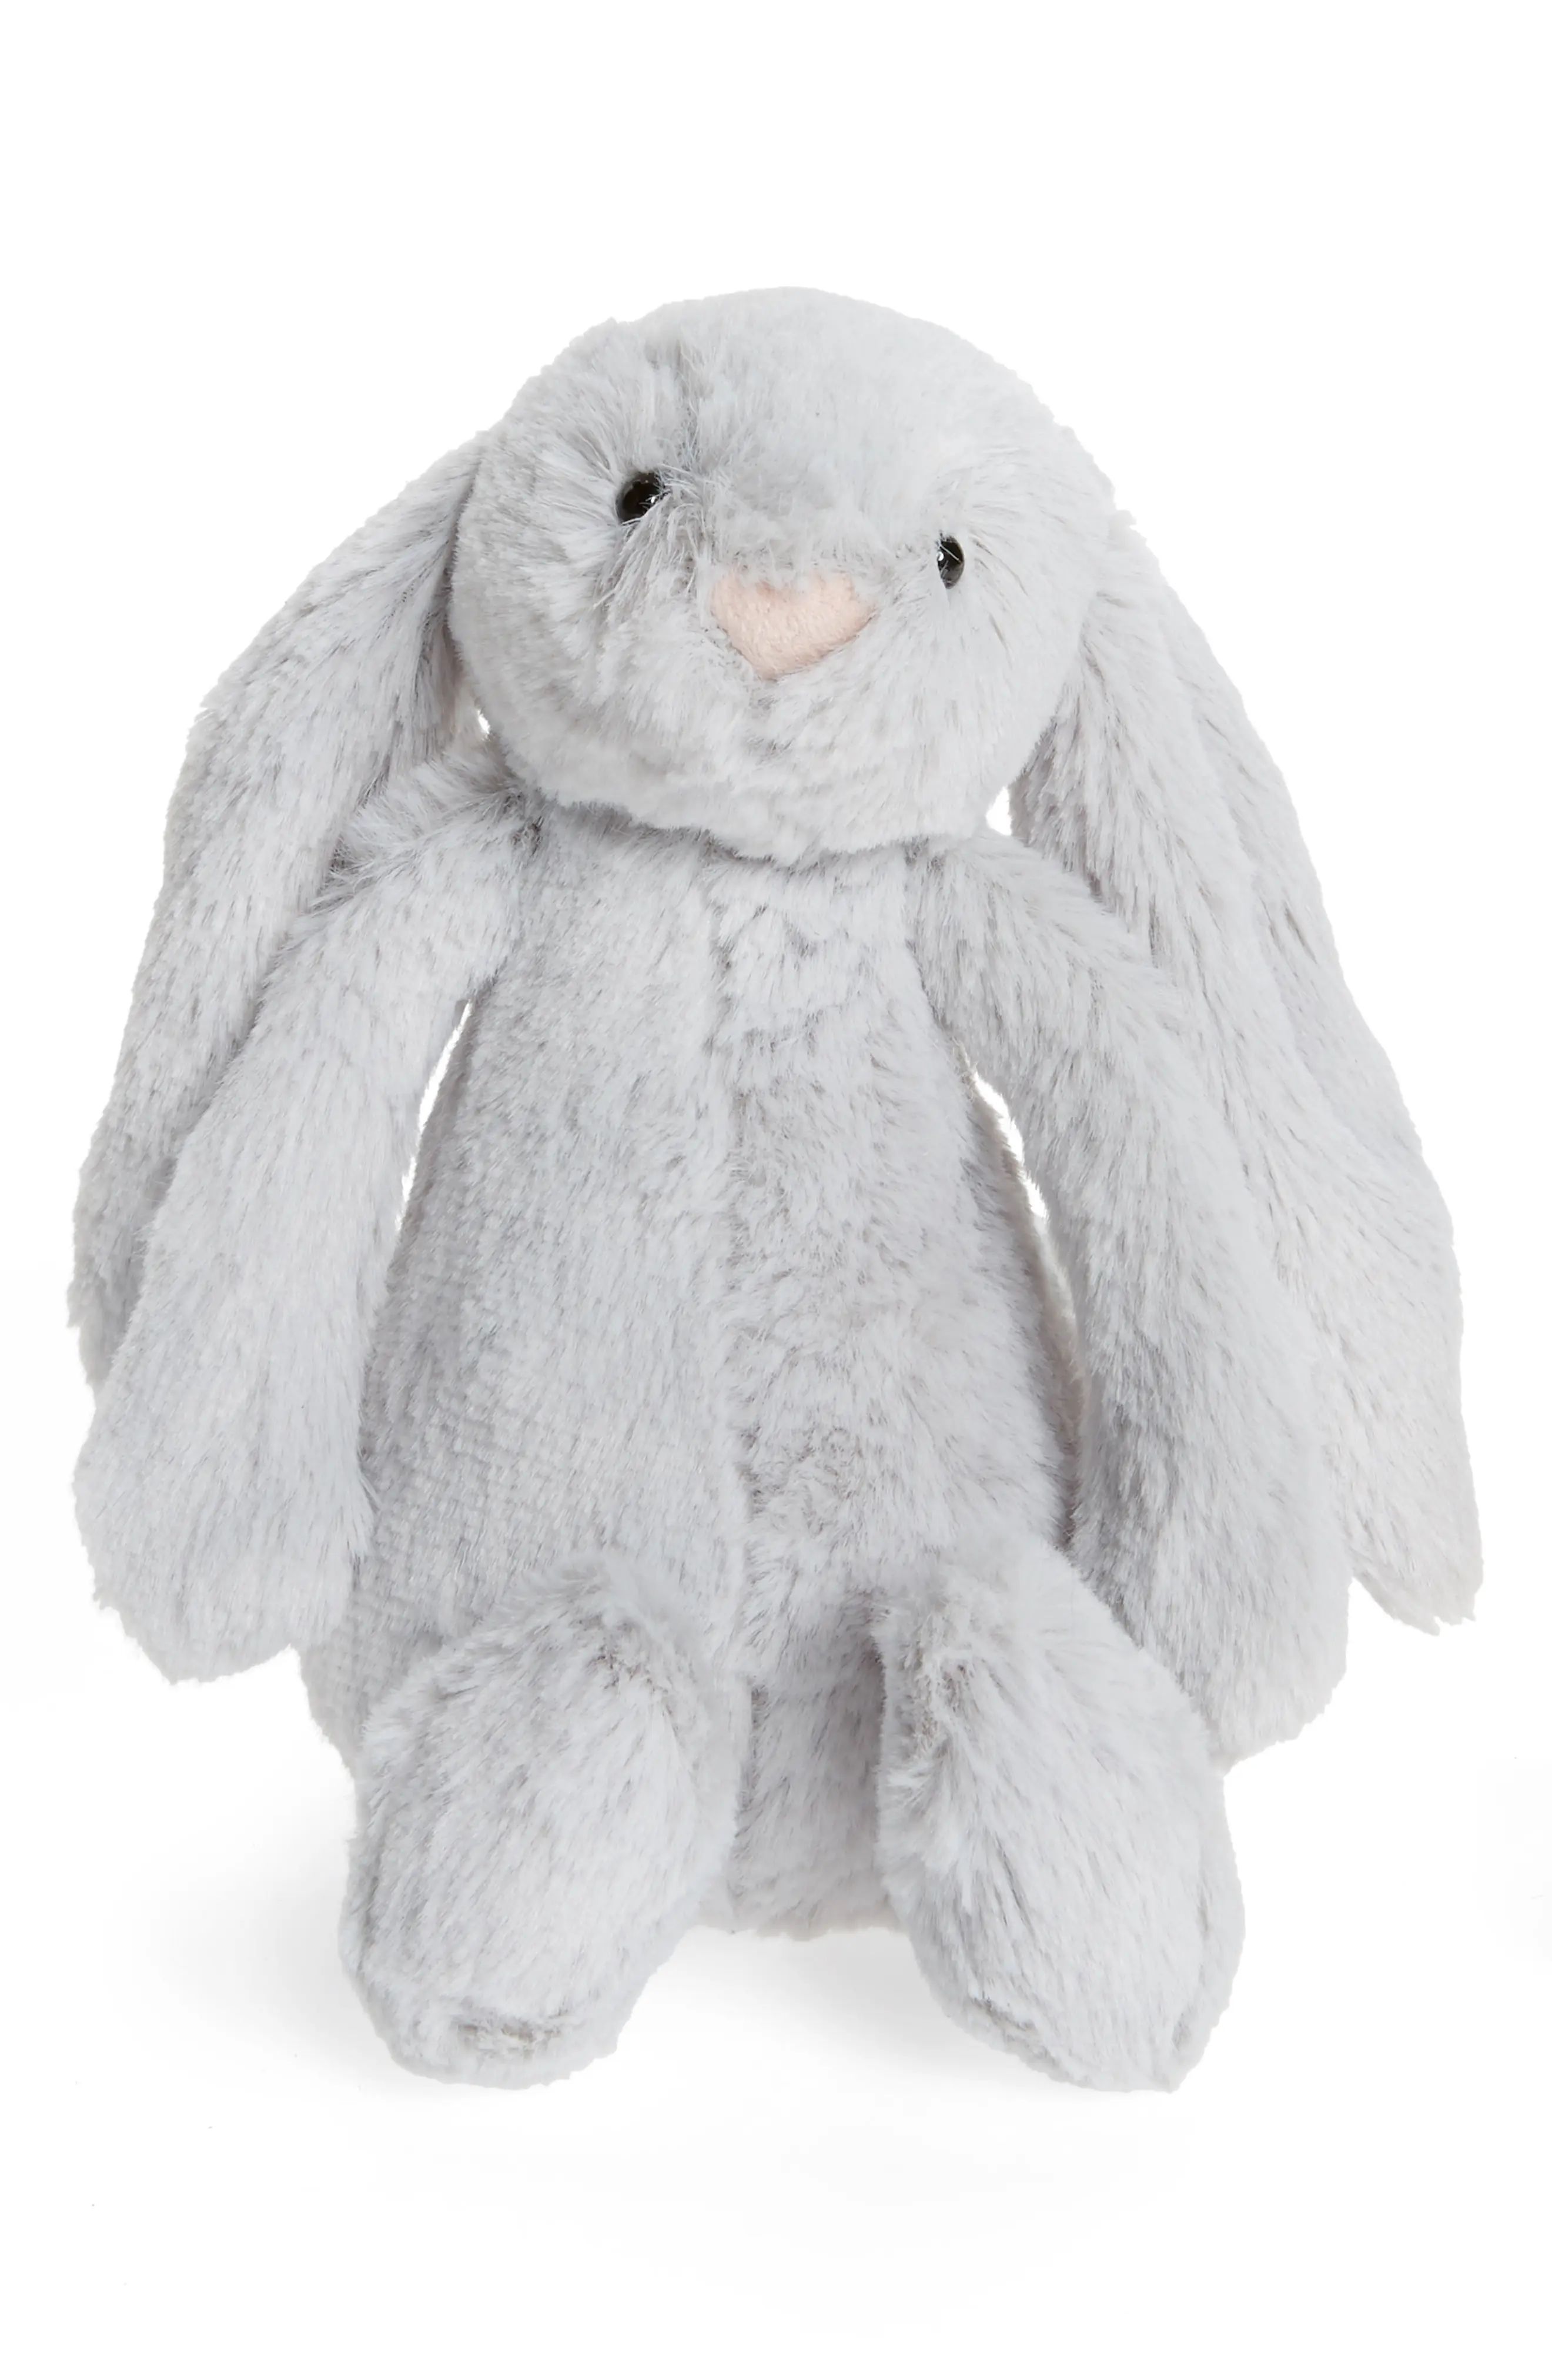 Jellycat 'Small Bashful Bunny' Stuffed Animal in Grey at Nordstrom | Nordstrom